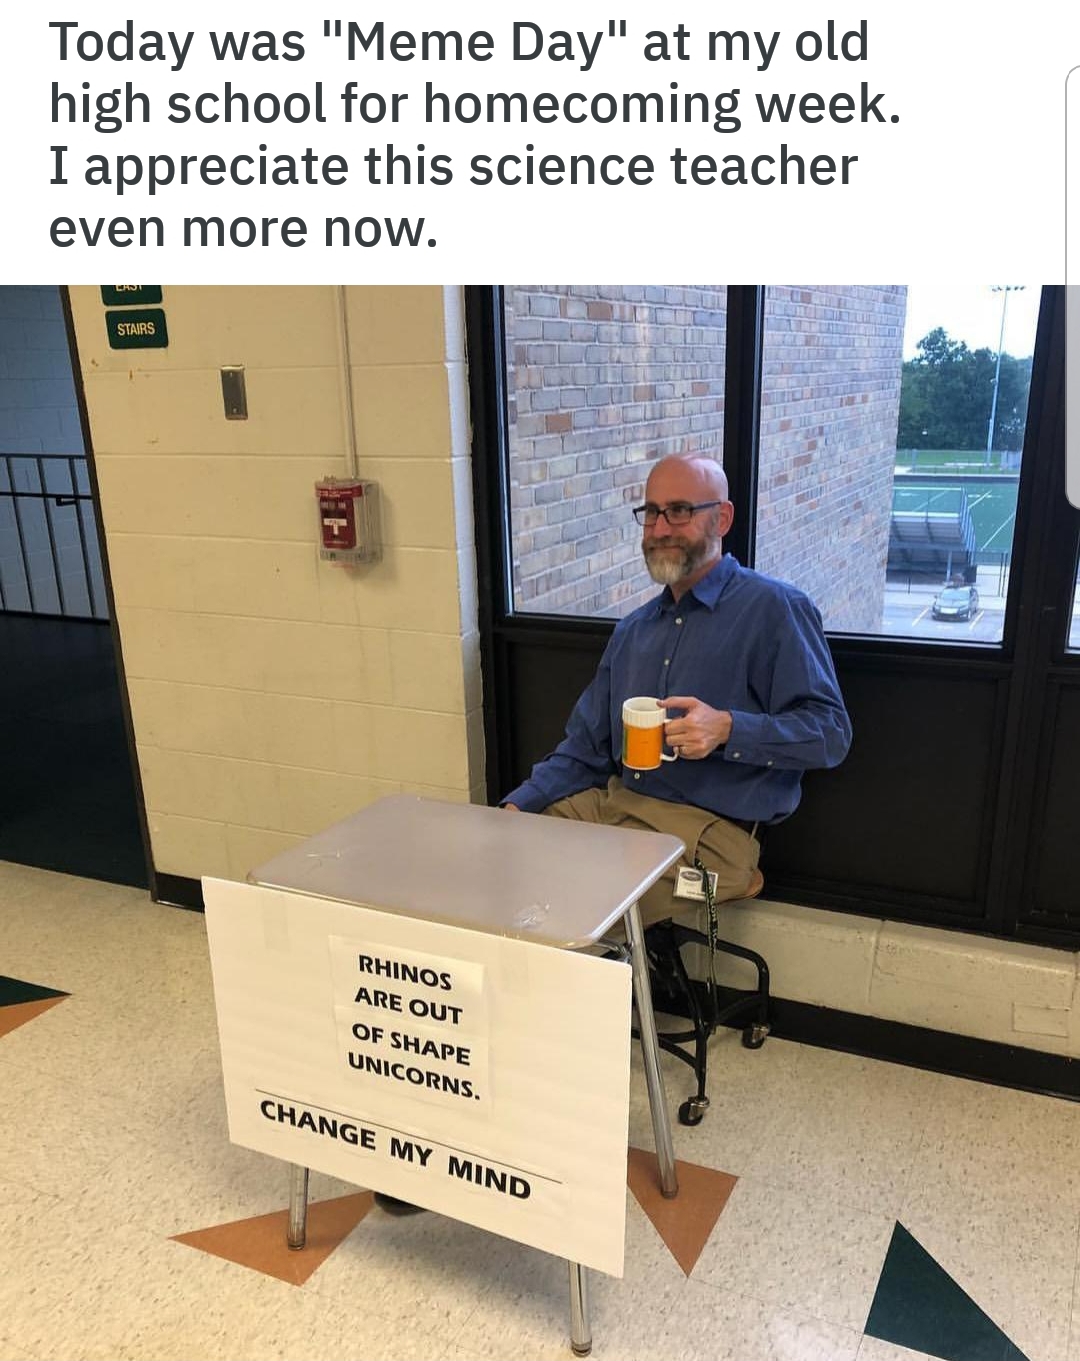 memes - meme day at school - Today was "Meme Day" at my old high school for homecoming week. I appreciate this science teacher even more now. Ruinos Are Out Of Shape Unicorns Change My Mind